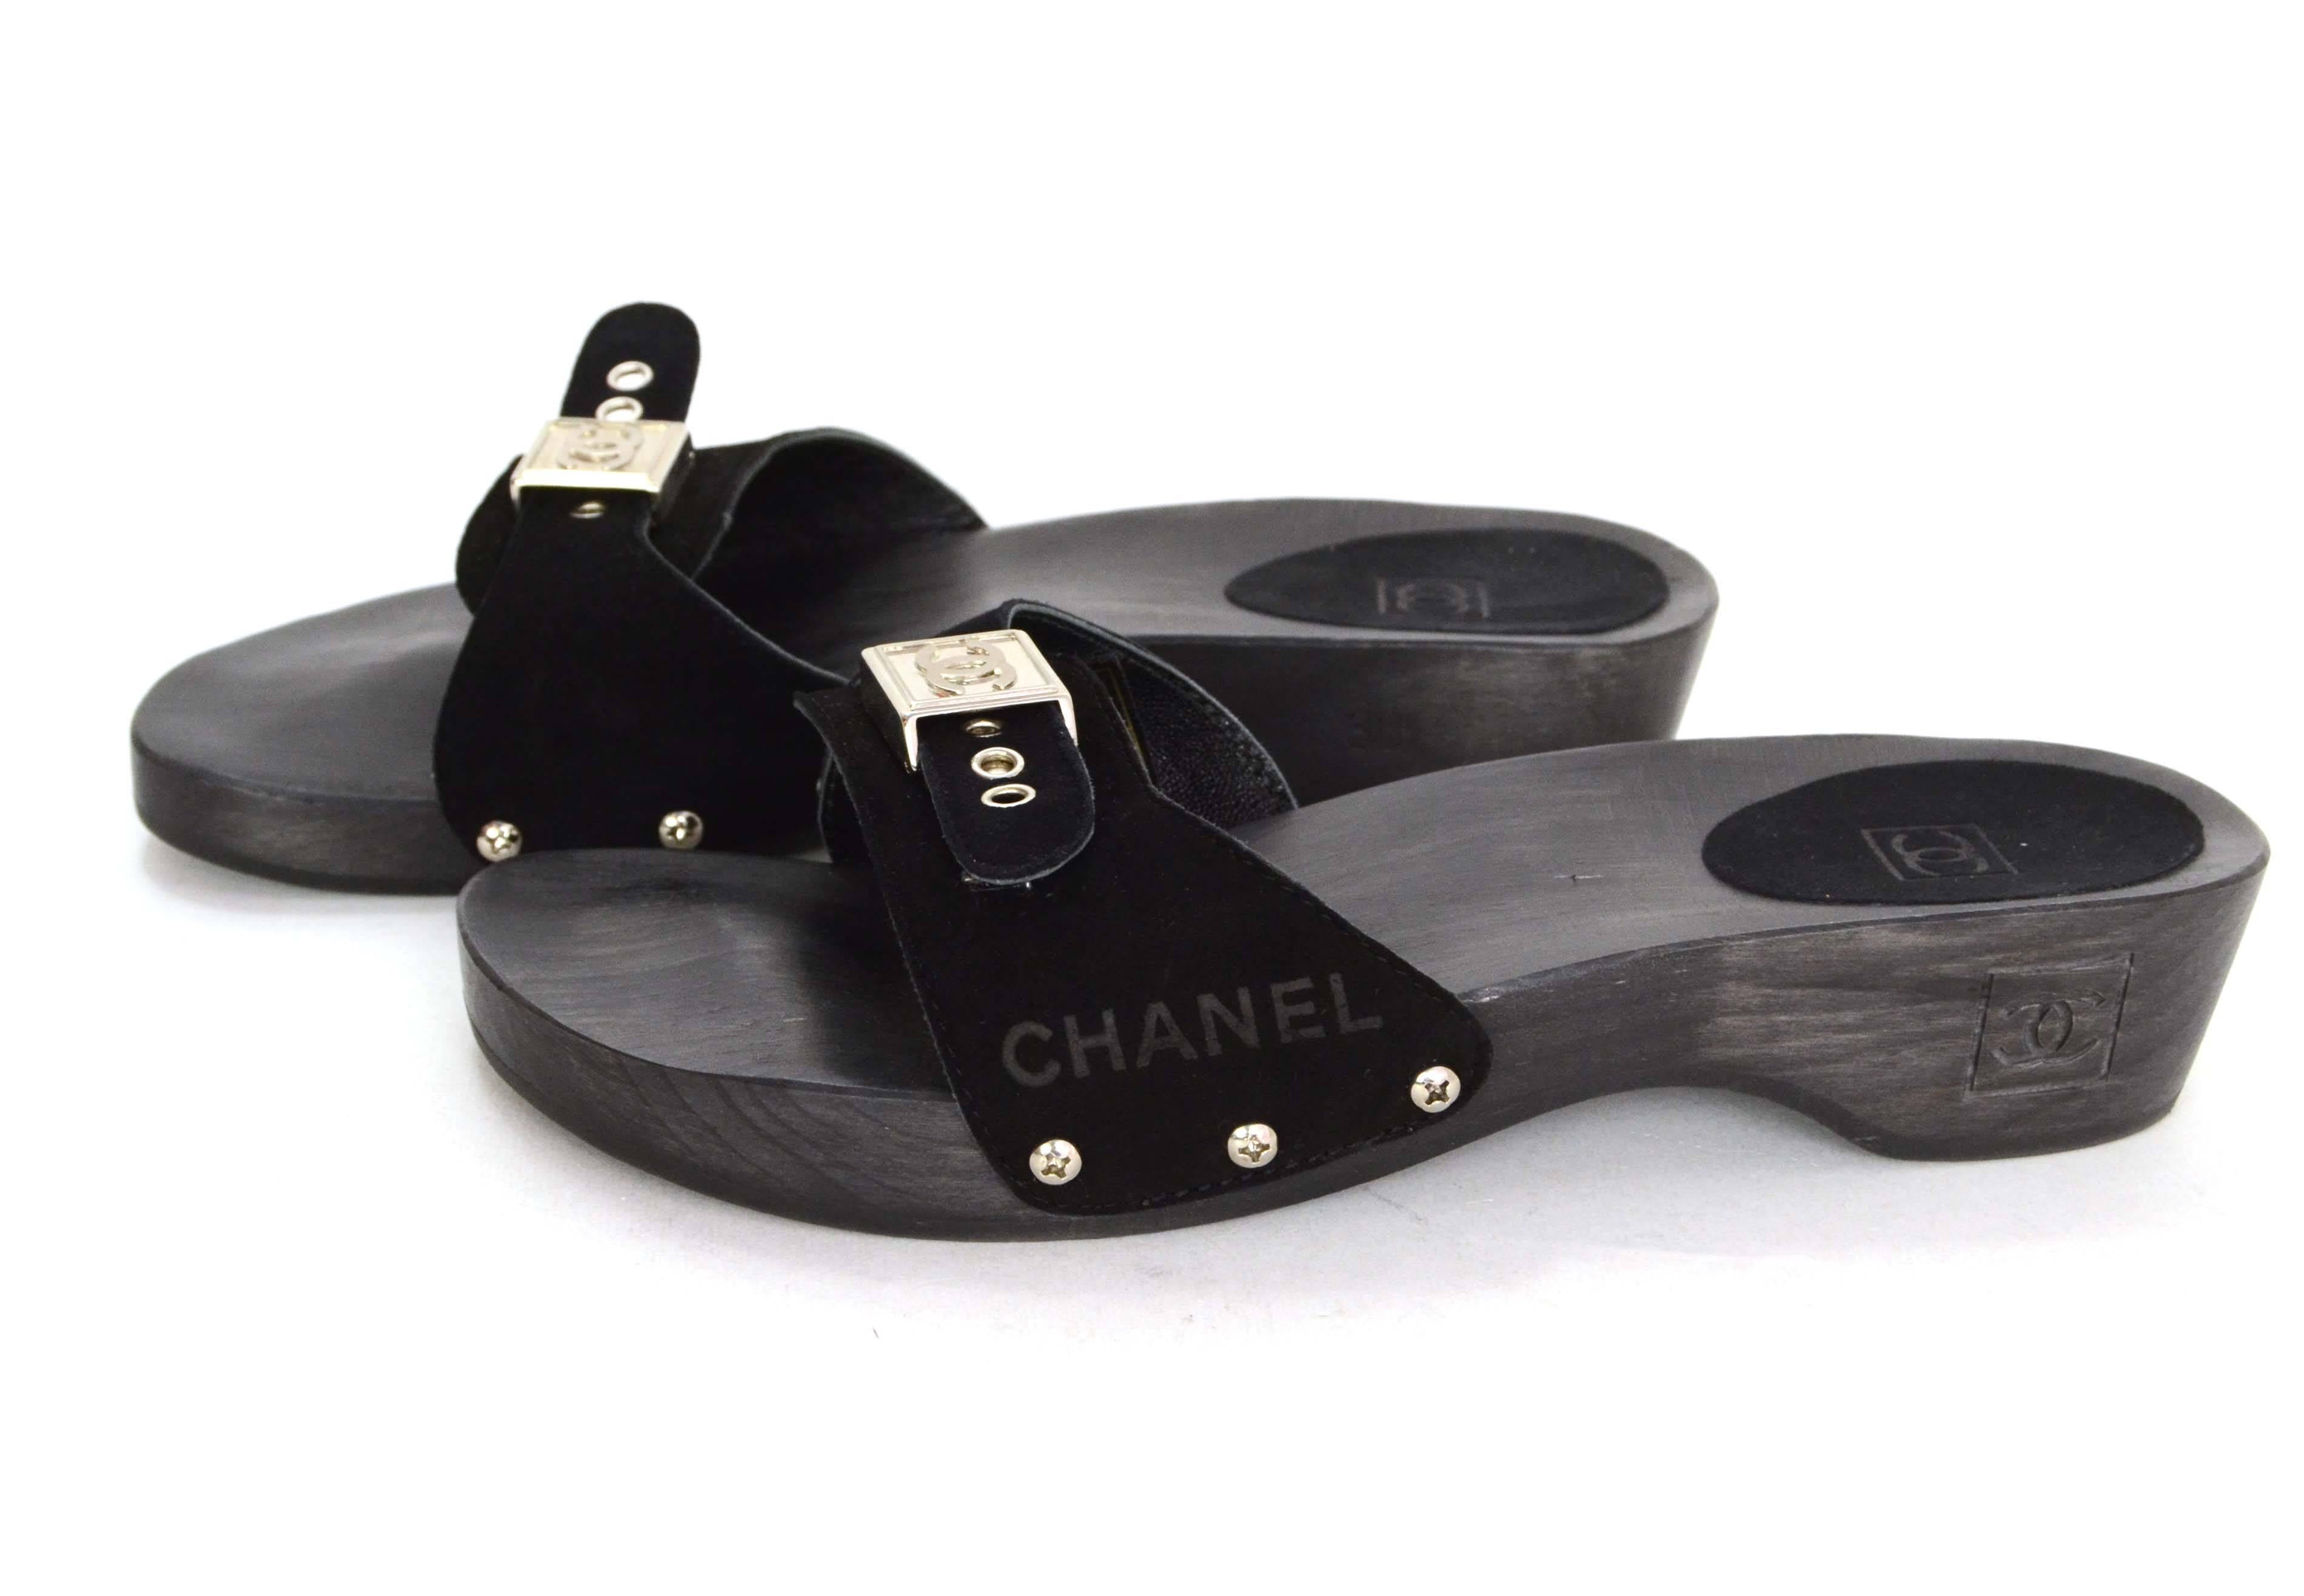 Chanel Black Suede & Wood Dr. Scholl's Open Toe Mules 
Features silvertone buckle and CC clasp on toe strap
Made In: Spain
Color: Brown and black
Materials: Wood and suede
Stamp: CC
Overall Condition: Excellent pre-owned condition with the